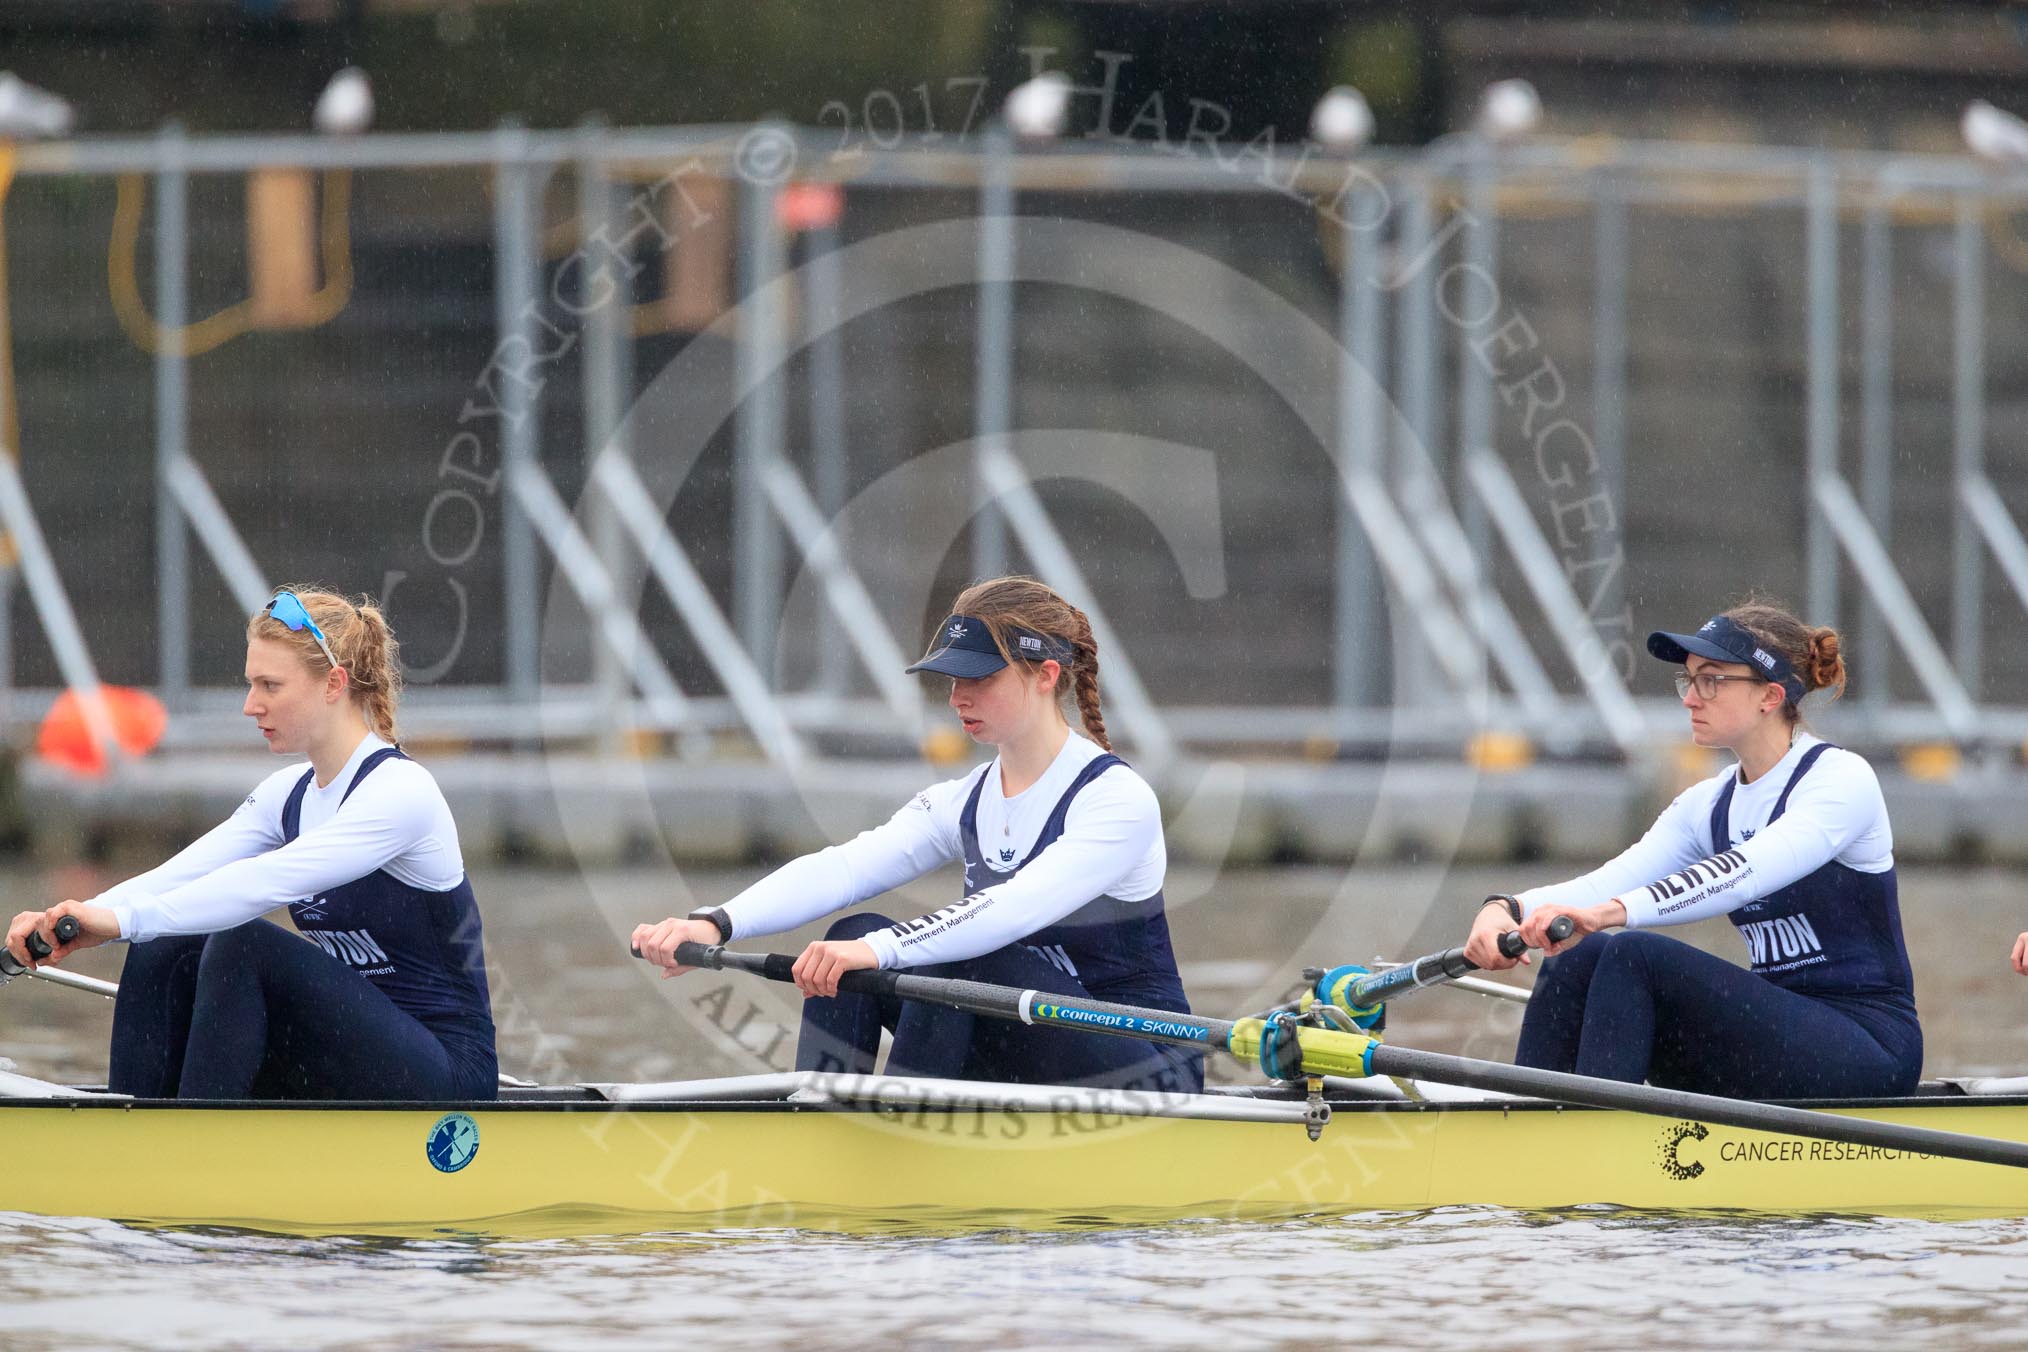 The Boat Race season 2018 - Women's Boat Race Trial Eights (OUWBC, Oxford): "Coursing River" waiting for the race to be started - stroke Beth Bridgman, 7 Juliette Perry, 6 Katherine Erickson.
River Thames between Putney Bridge and Mortlake,
London SW15,

United Kingdom,
on 21 January 2018 at 14:27, image #48